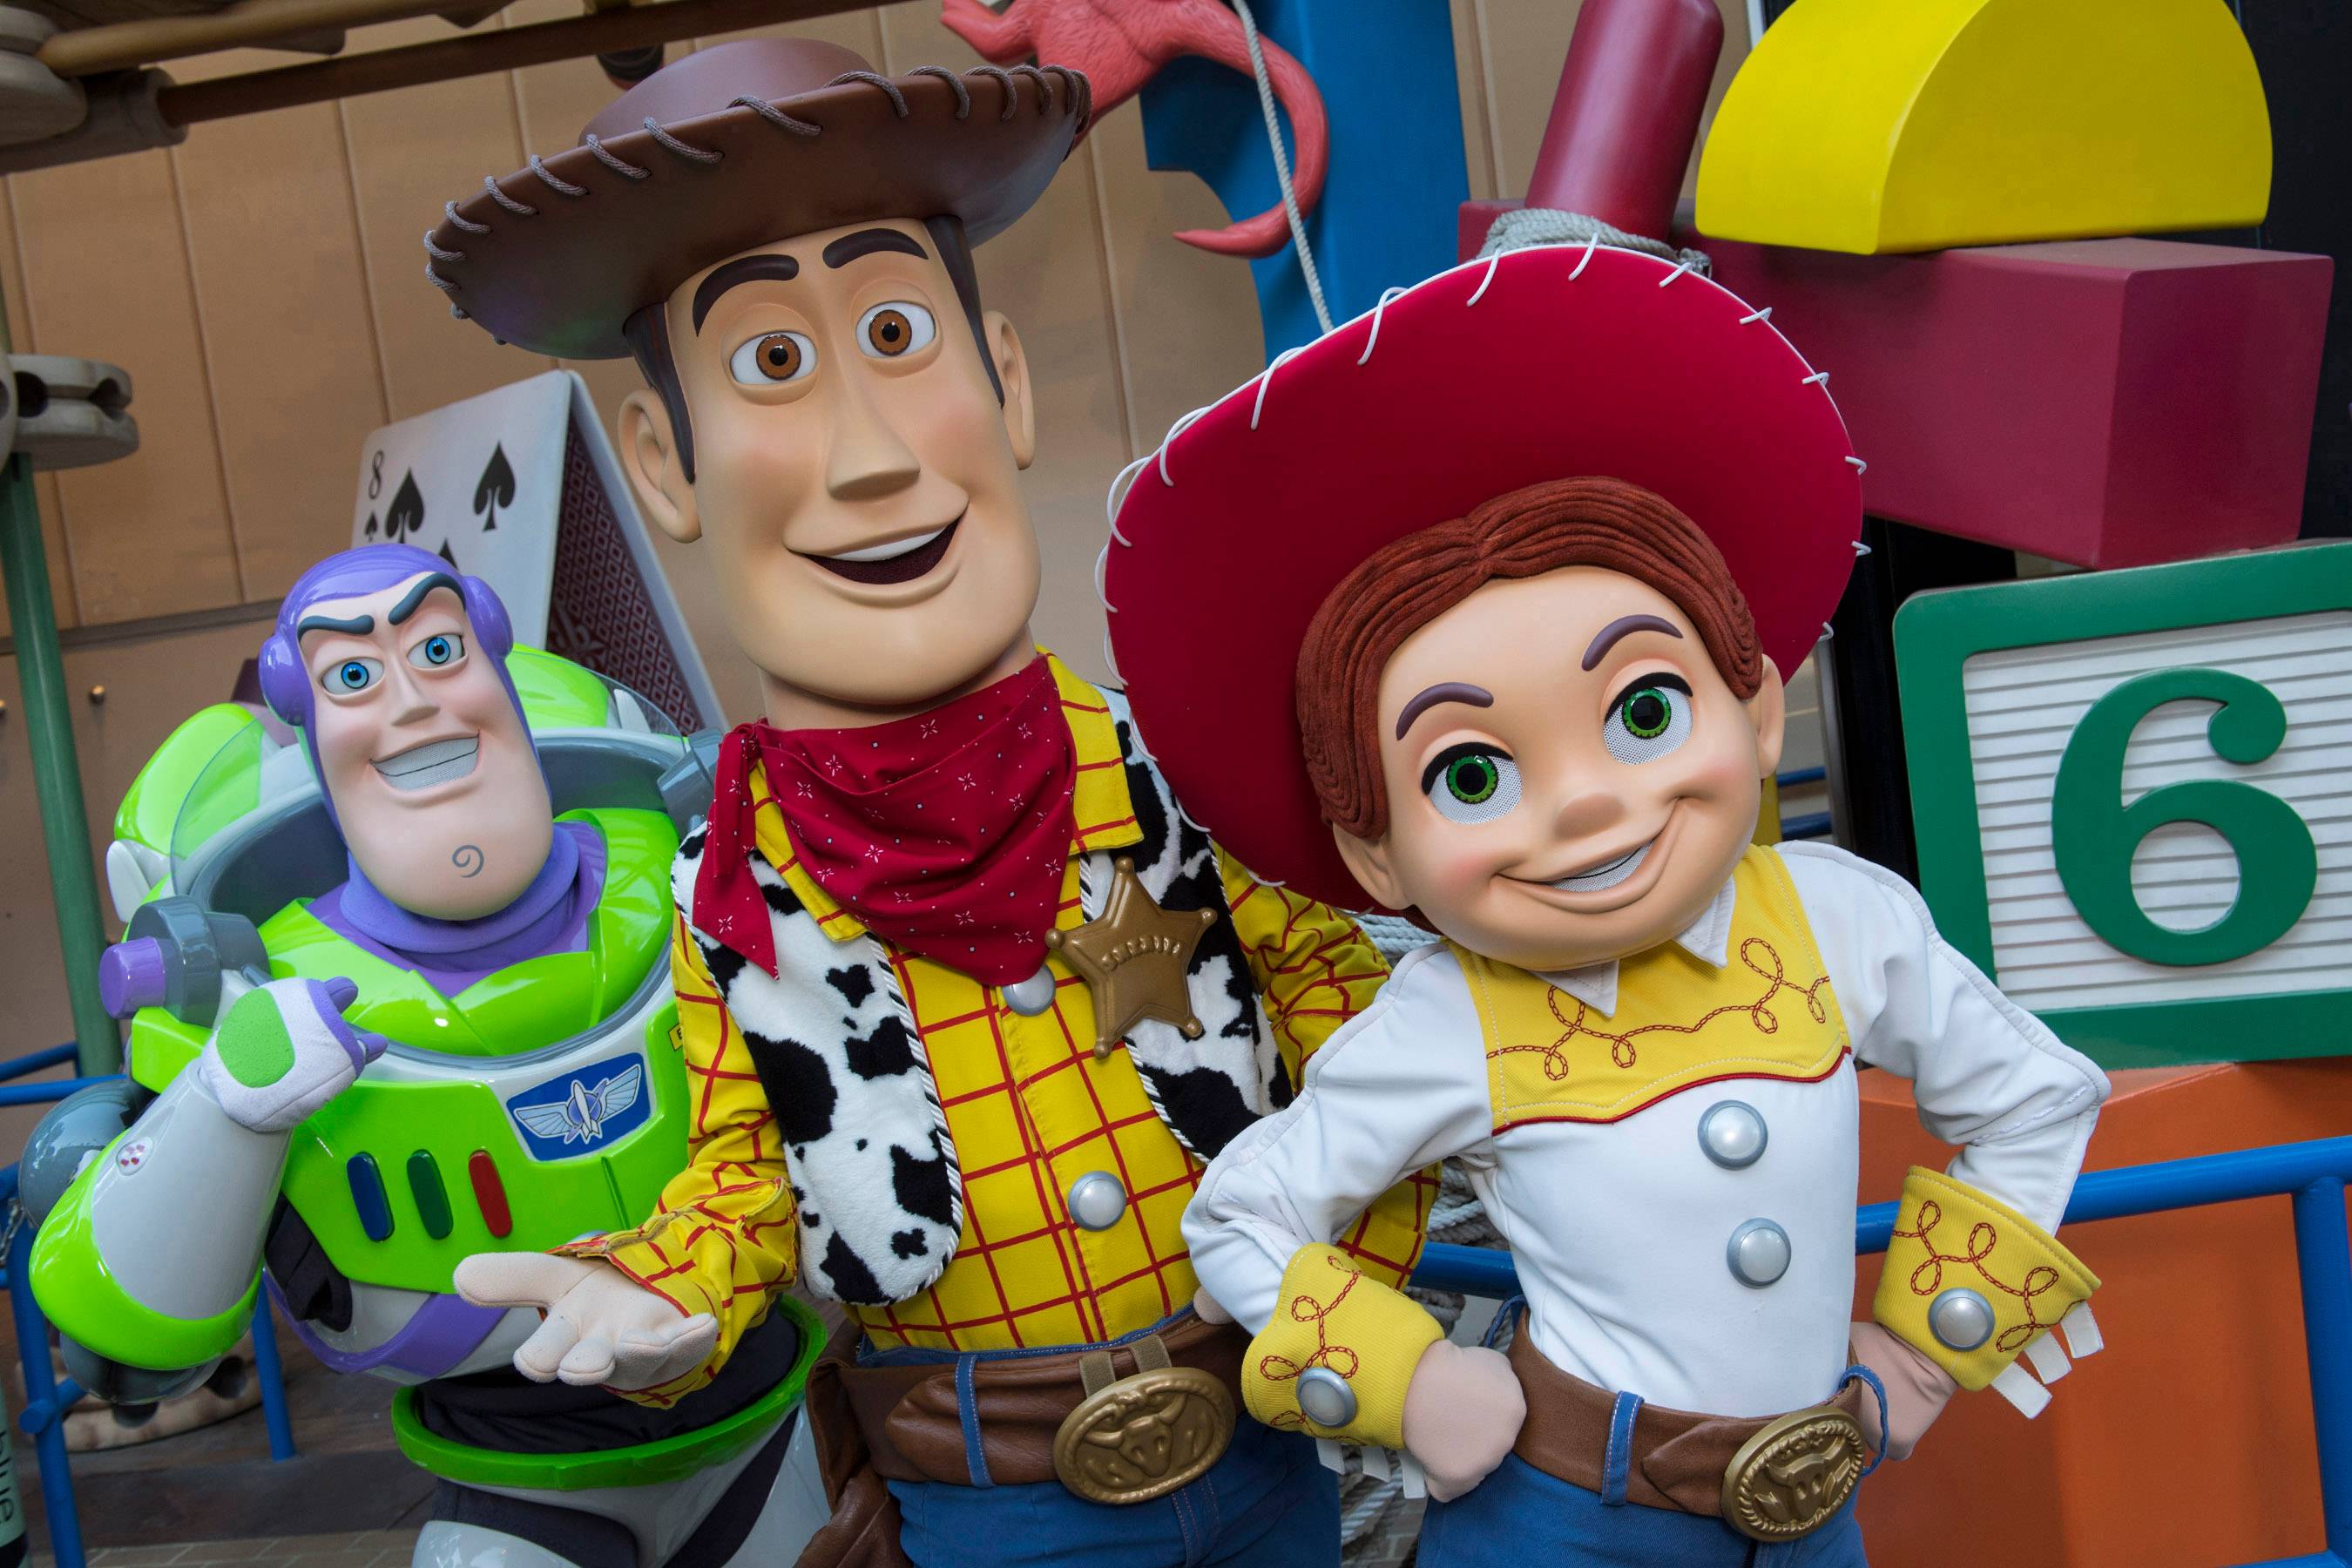 Buzz, Woody, and Jessie character meet and greets are back in Toy Story Land at Disney's Hollywood Studios